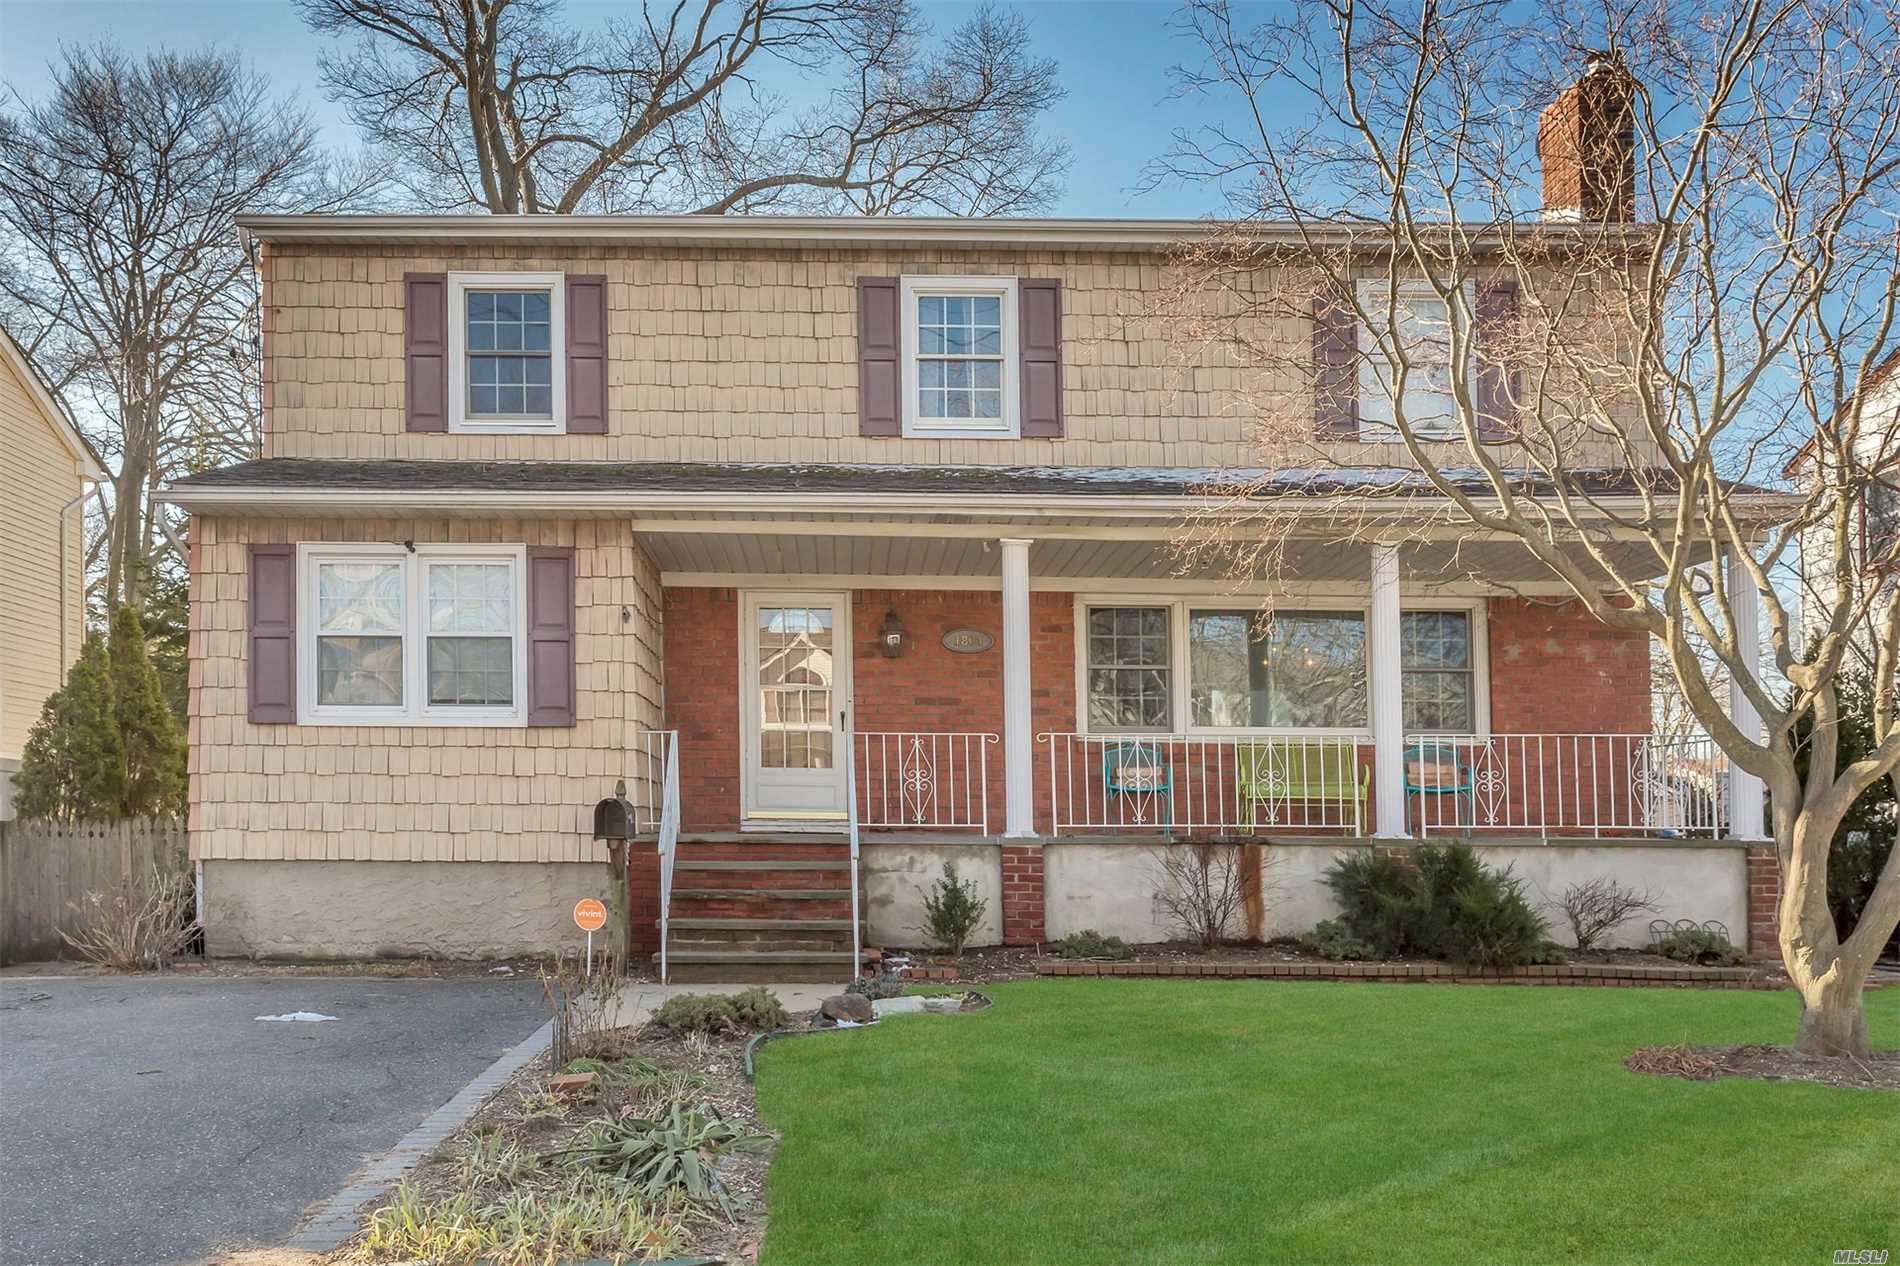 Move In Condition 6 Bdrm 2 1/2 Bath Updated Colonial. Living Room W/Wood Burning Fireplace, Large Eik, Fdr, Hardwood Floors, Cac, 3 Zone Heat, 200 Amp Electric. Possible Mother/Daughter W/Proper Permits. Won&rsquo;t Last!